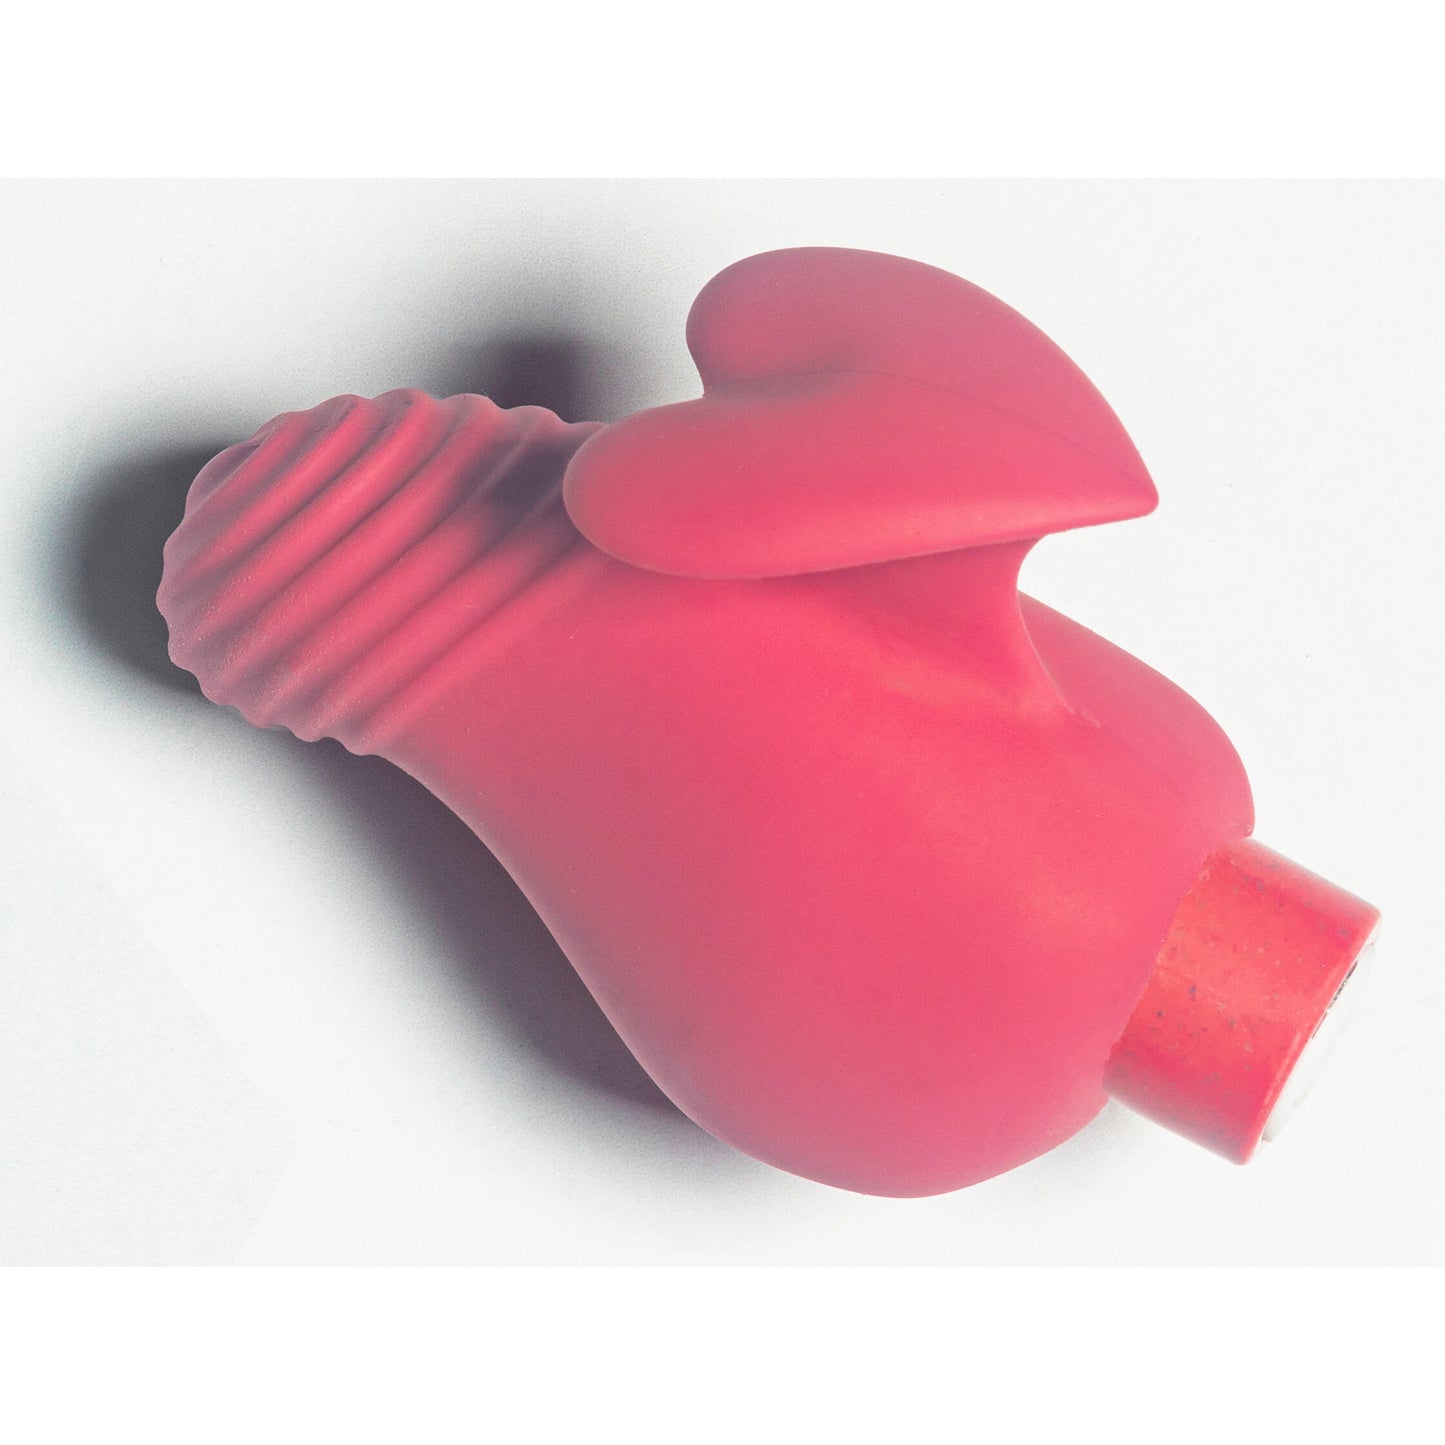 Blush Gaia Eco Love - by The Bigger O online sex toy shop. USA, Canada and UK shipping available.